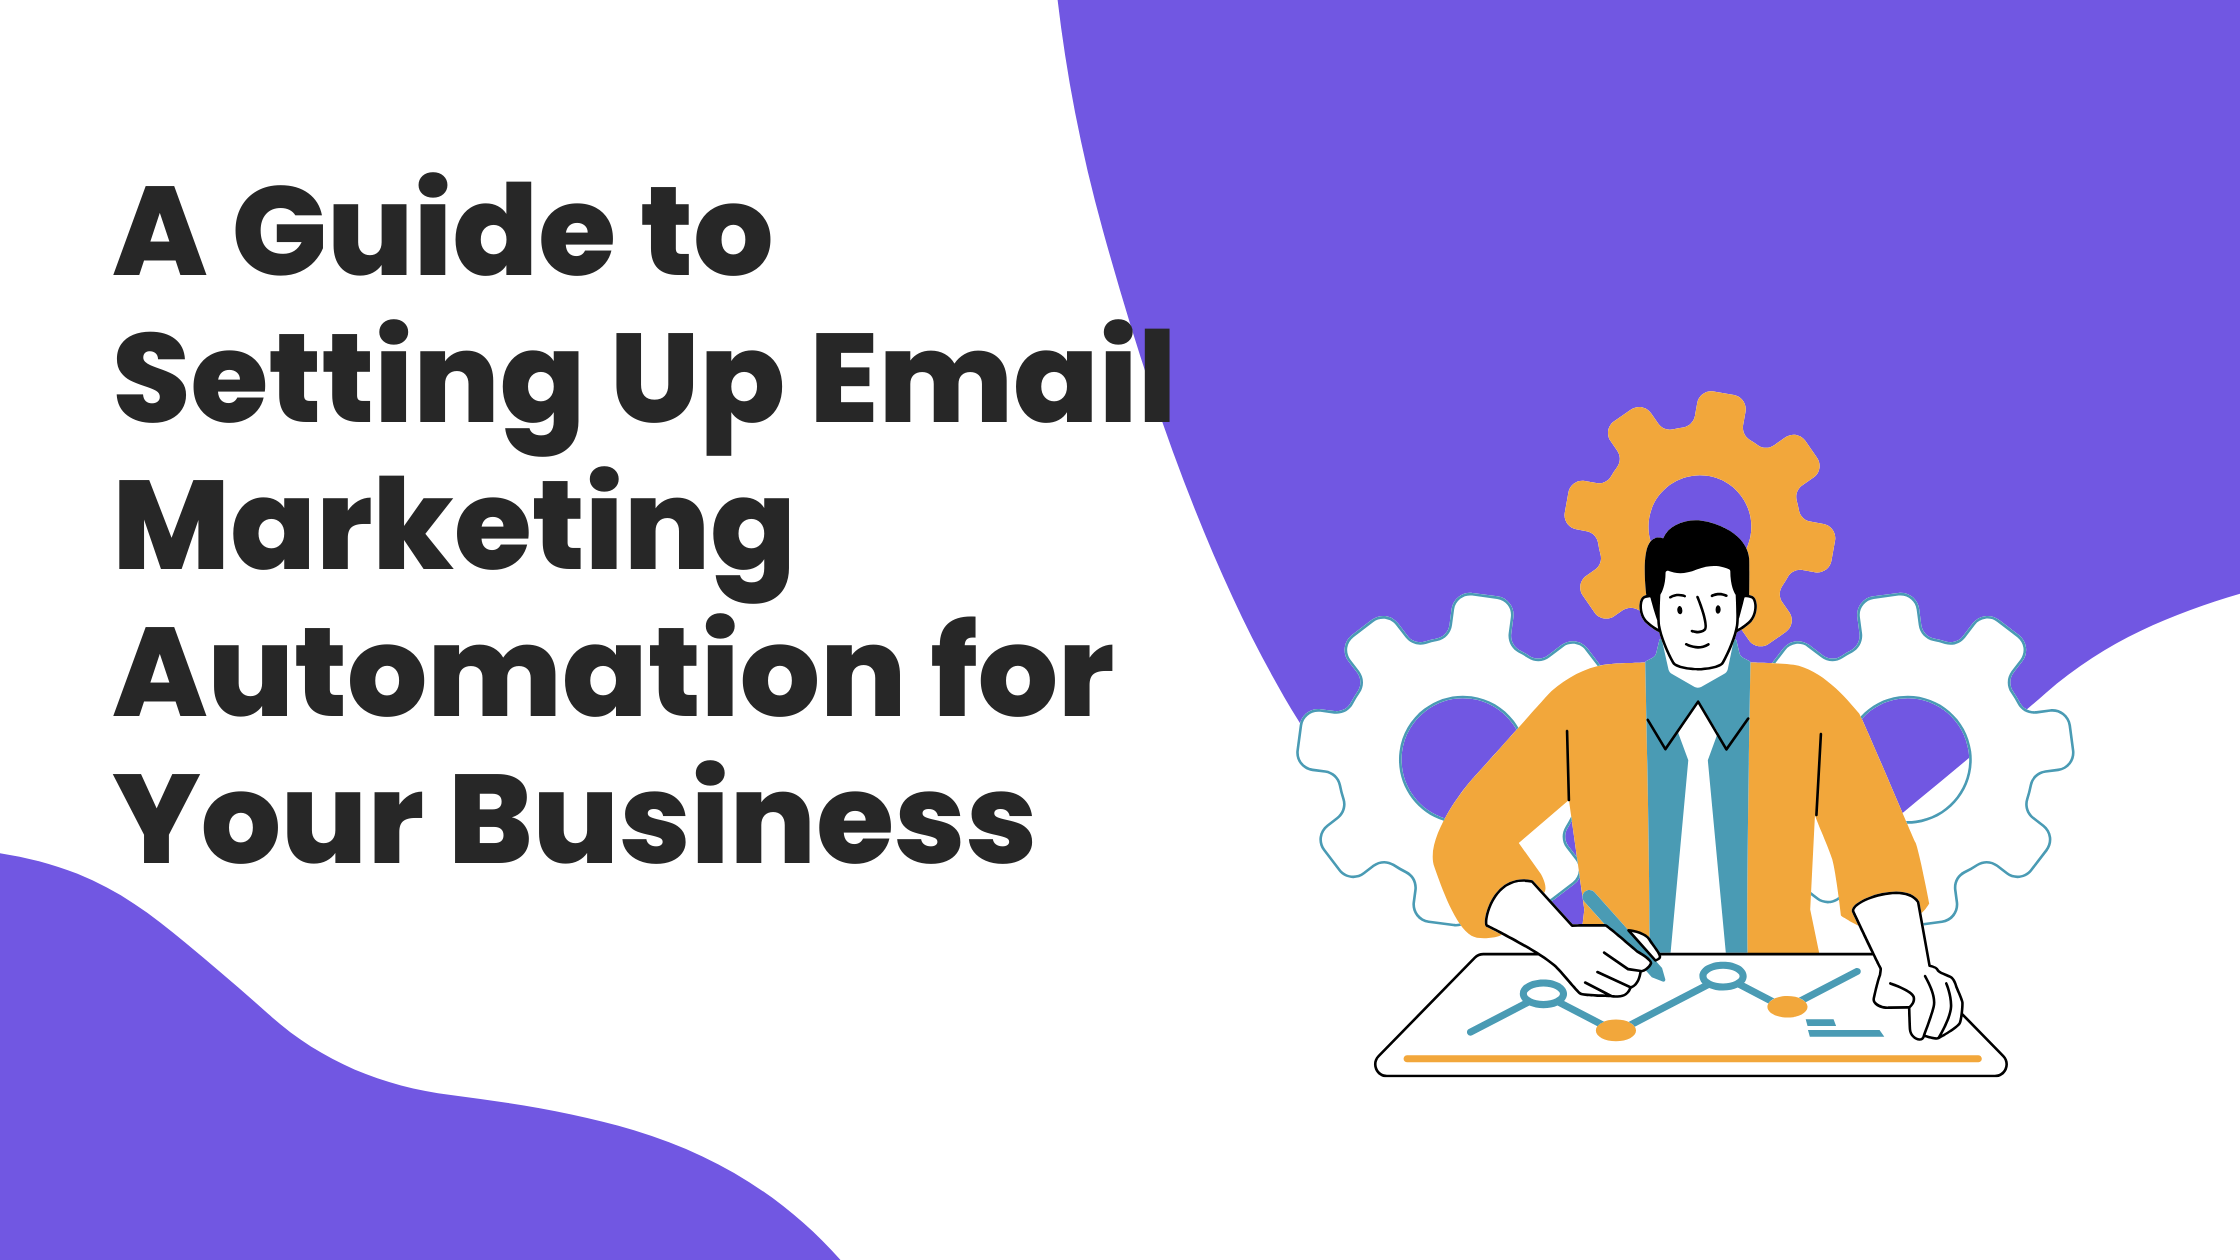 A Guide to Setting Up Email Marketing Automation for Your Business